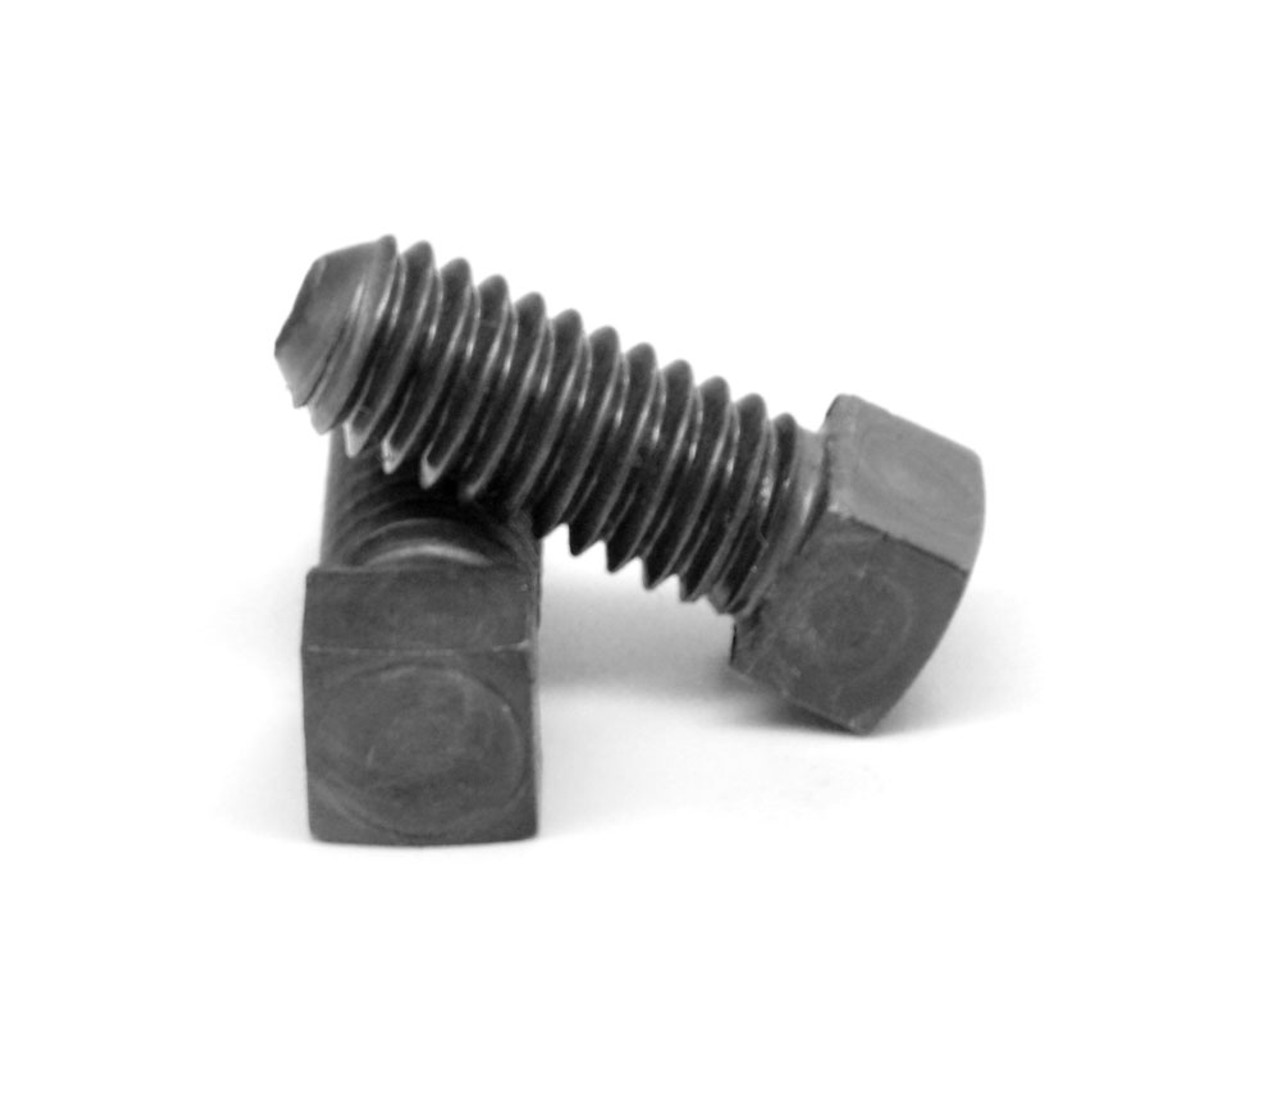 1"-8 x 2 1/2" (FT) Coarse Thread Square Head Set Screw Cup Point Low Carbon Steel Case Hardened Plain Finish